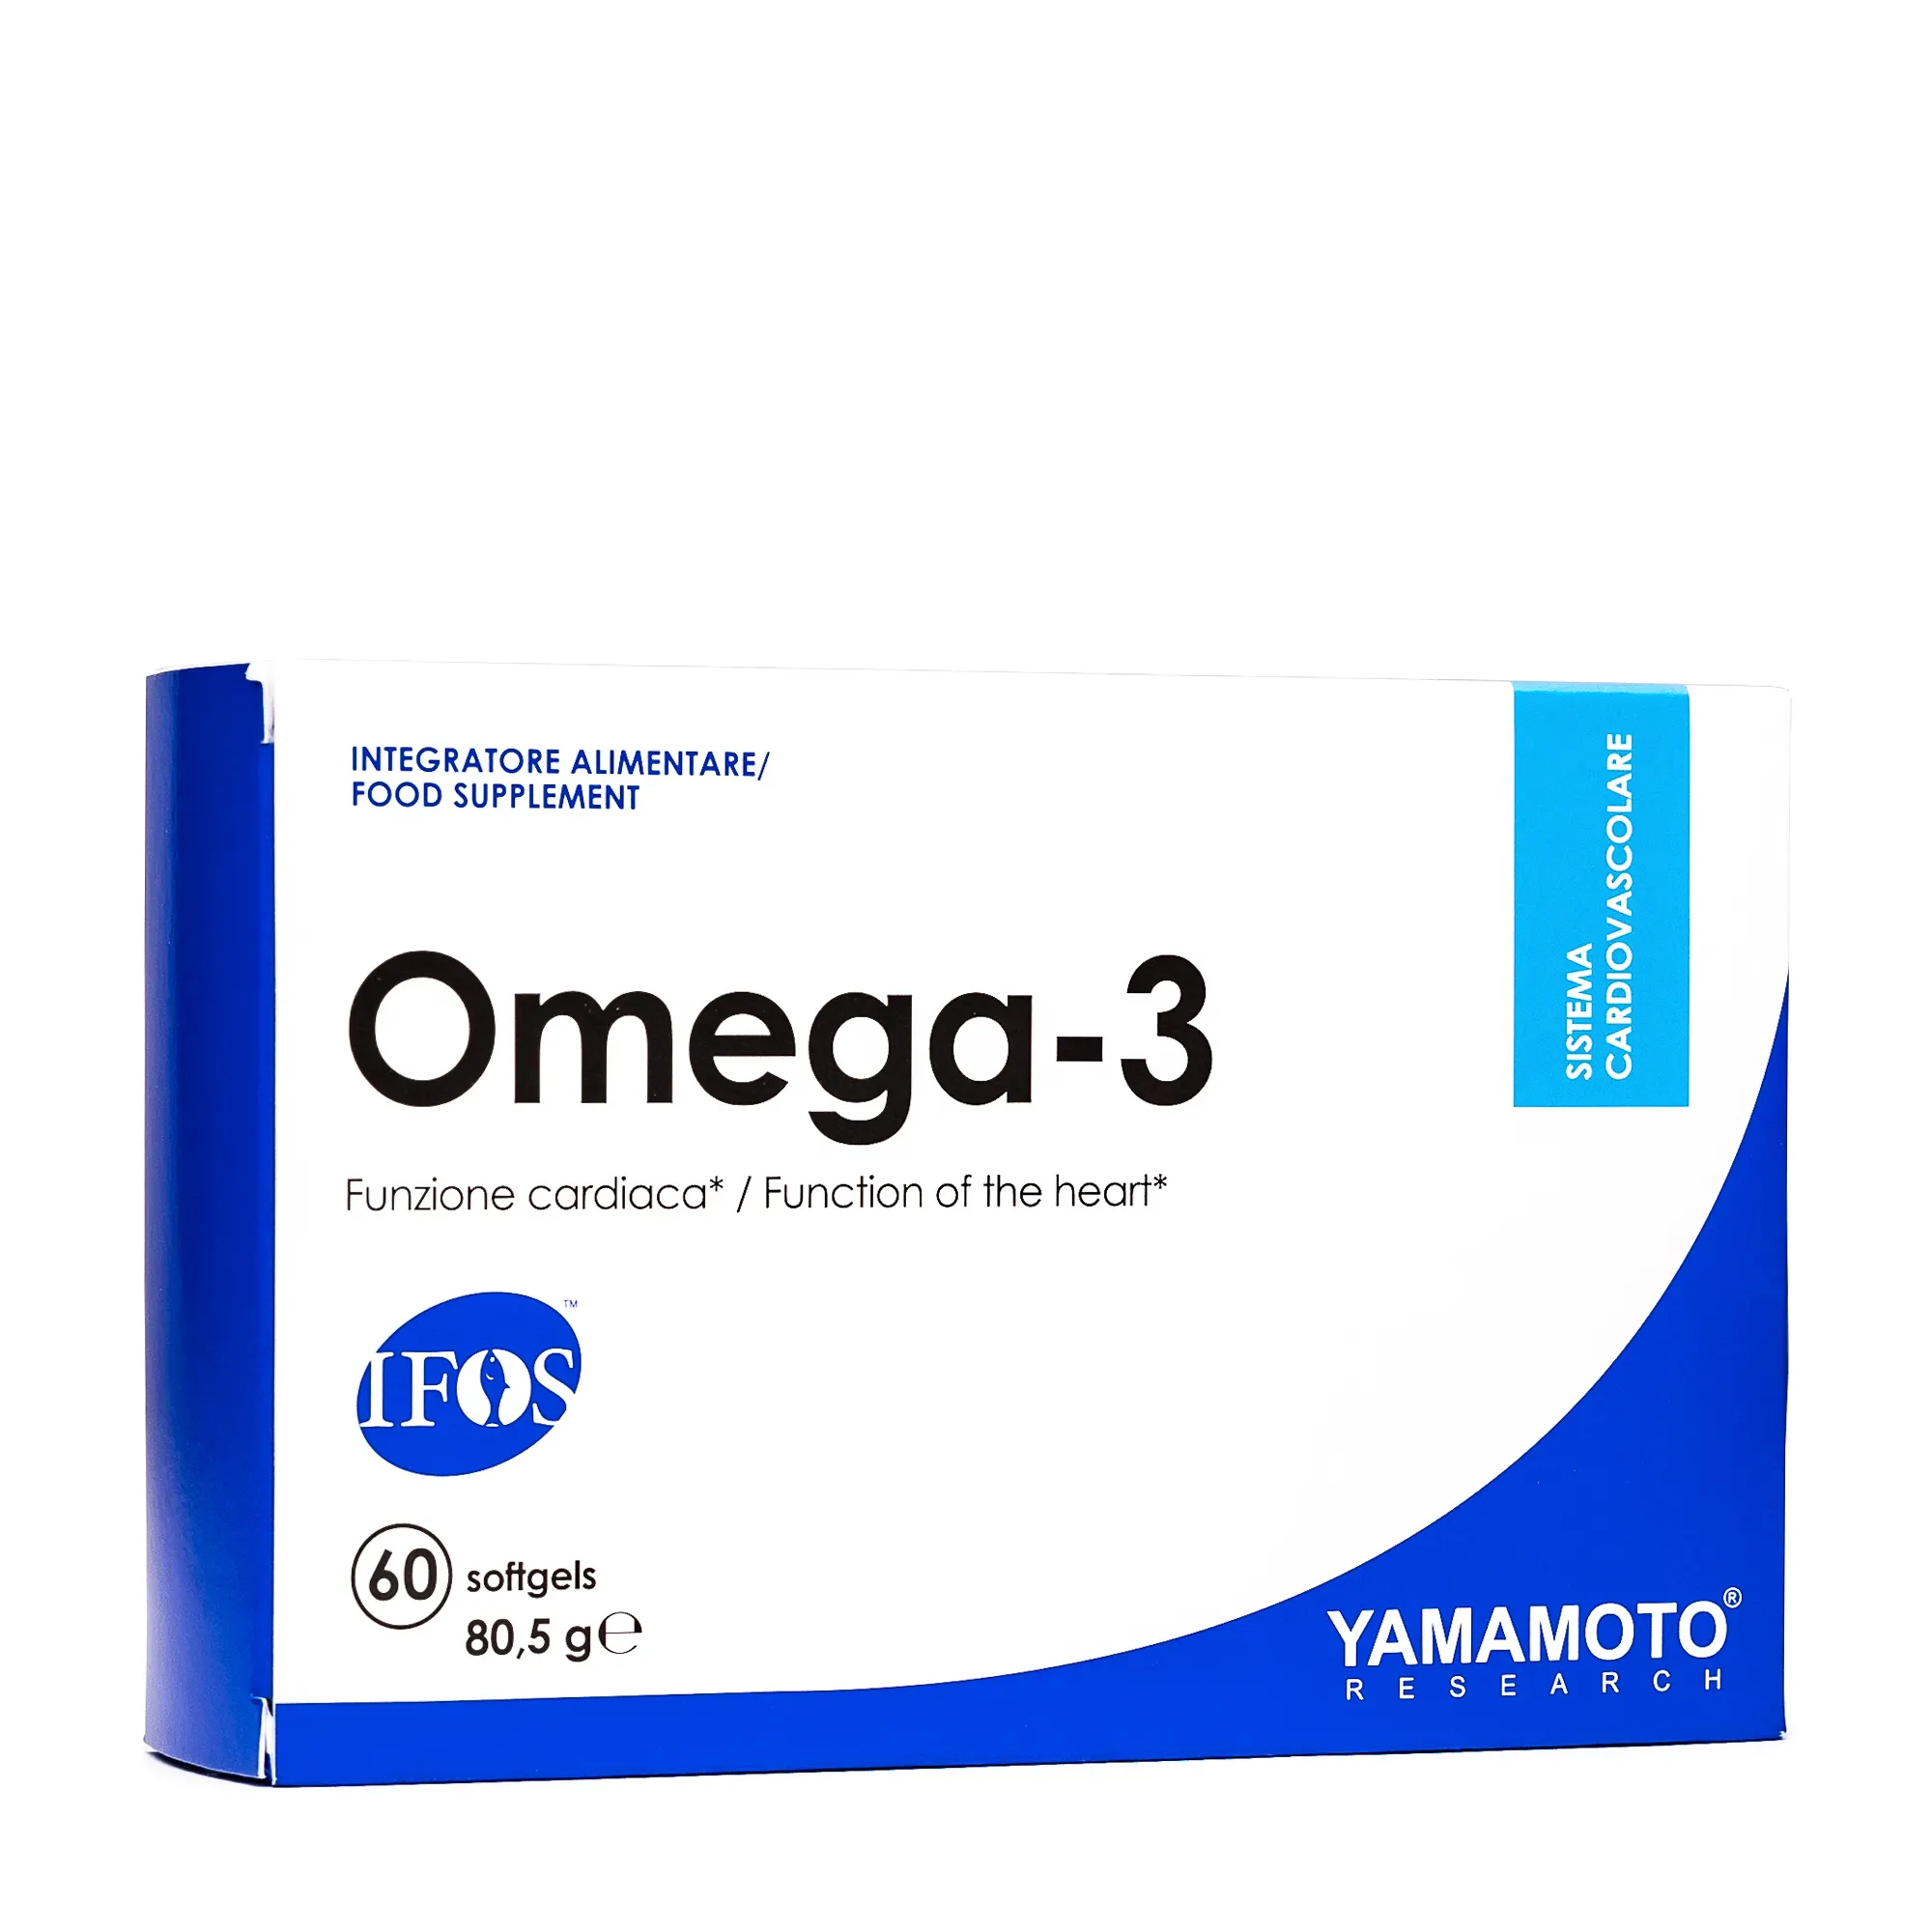 OMEGA-3 IFOS – 60 ДРАЖЕТА / 15 ДОЗИ